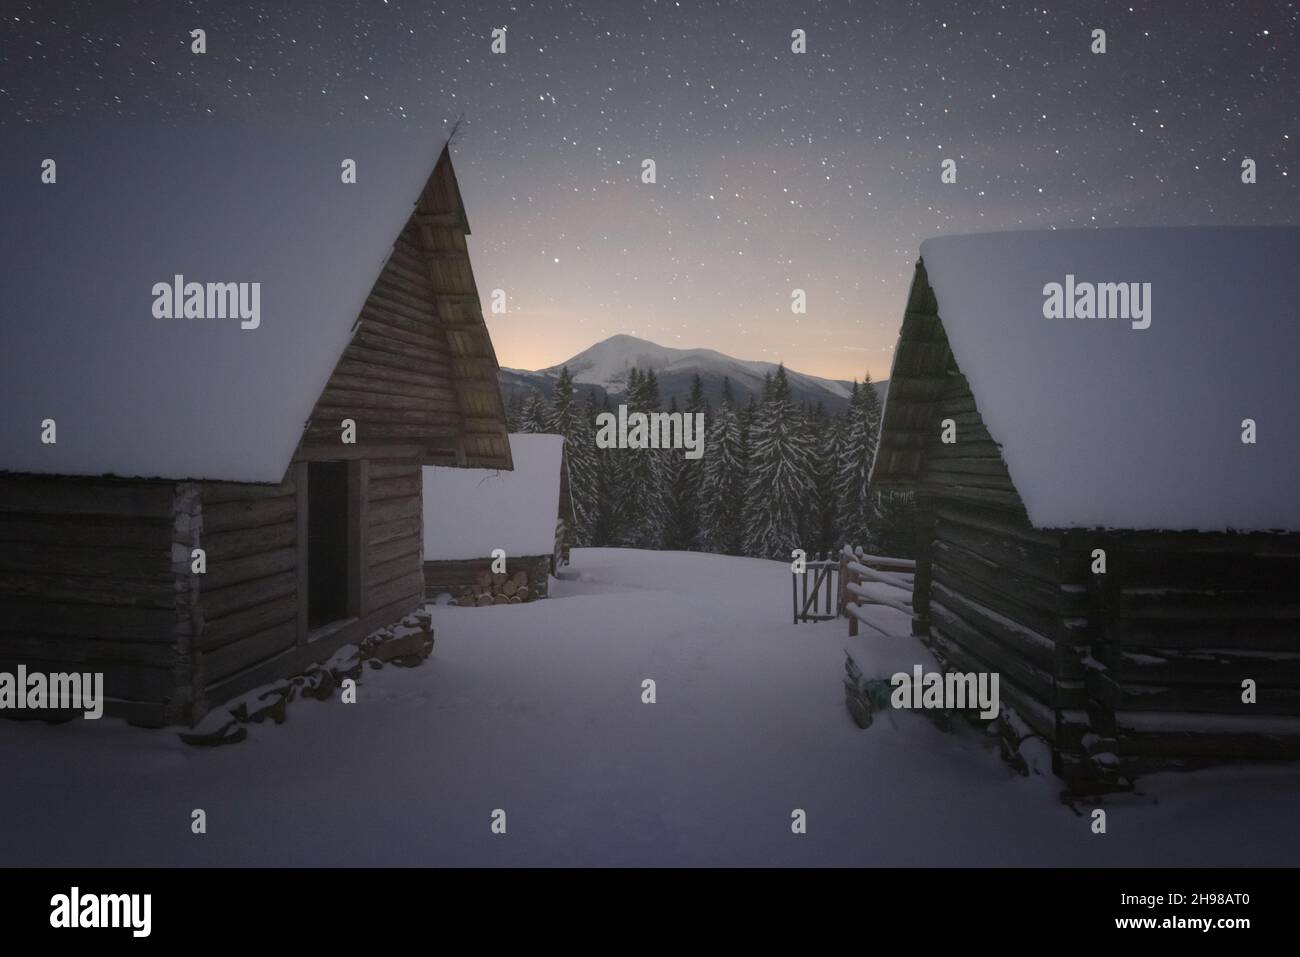 Moody winter landscape with wooden houses in snowy mountains. Starry sky with snowy peaks and snow covered hut. Christmas holiday and winter vacations concept Stock Photo